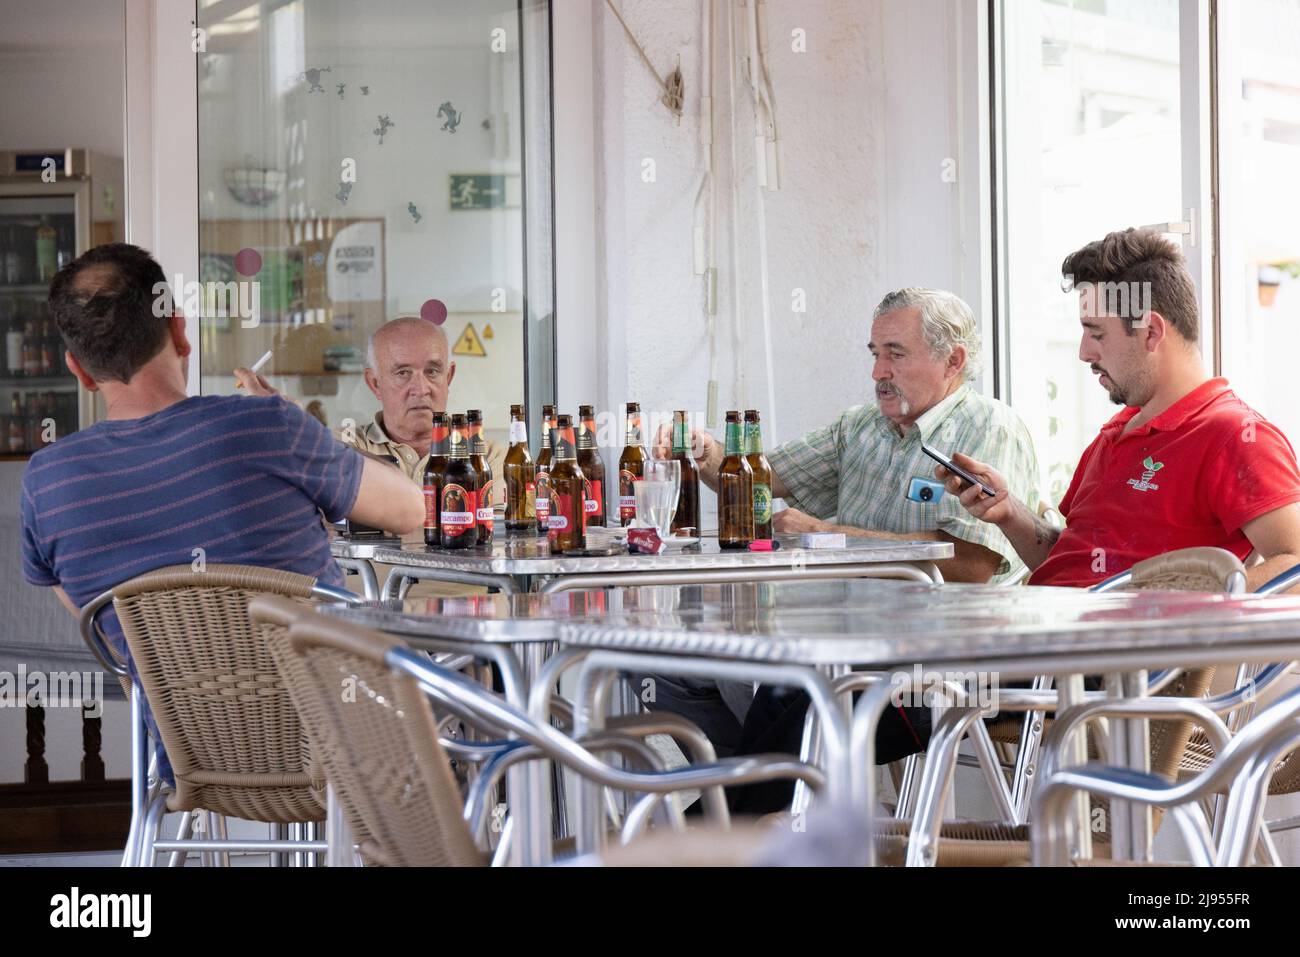 Spanish lifestyle; A group of middle aged men sitting at a table drinking beer in a bar during the day, Andalusia, Spain, Europe Stock Photo